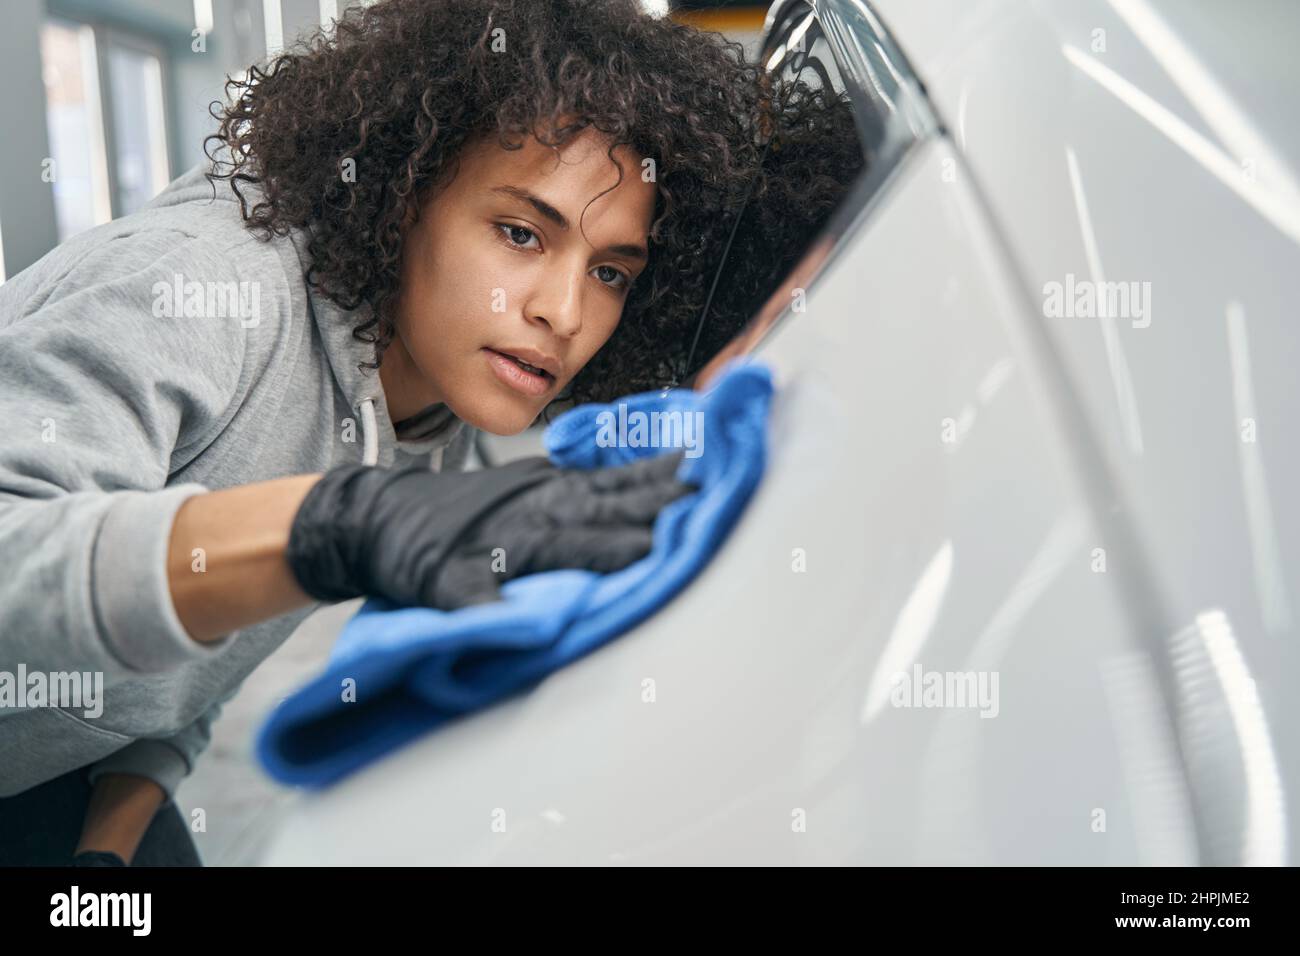 Concentrated young auto detailer buffing motorcar exterior Stock Photo